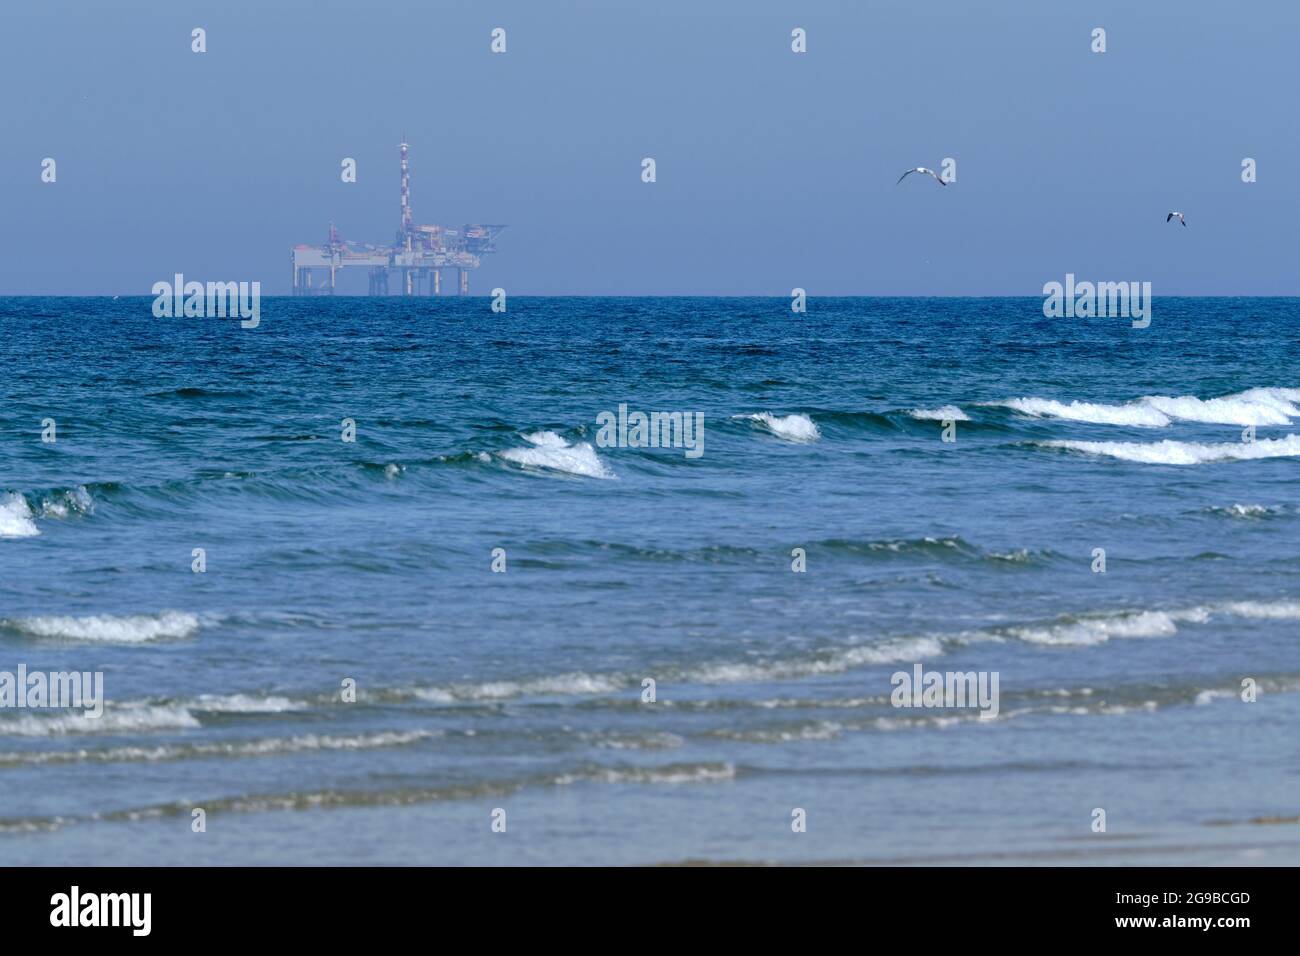 Ameland,Netherlands April 20,2021-NAM, Oil rig, offshore platform with beach, sand and surf. Natural gas extraction in the Wadden-North Sea Region Stock Photo